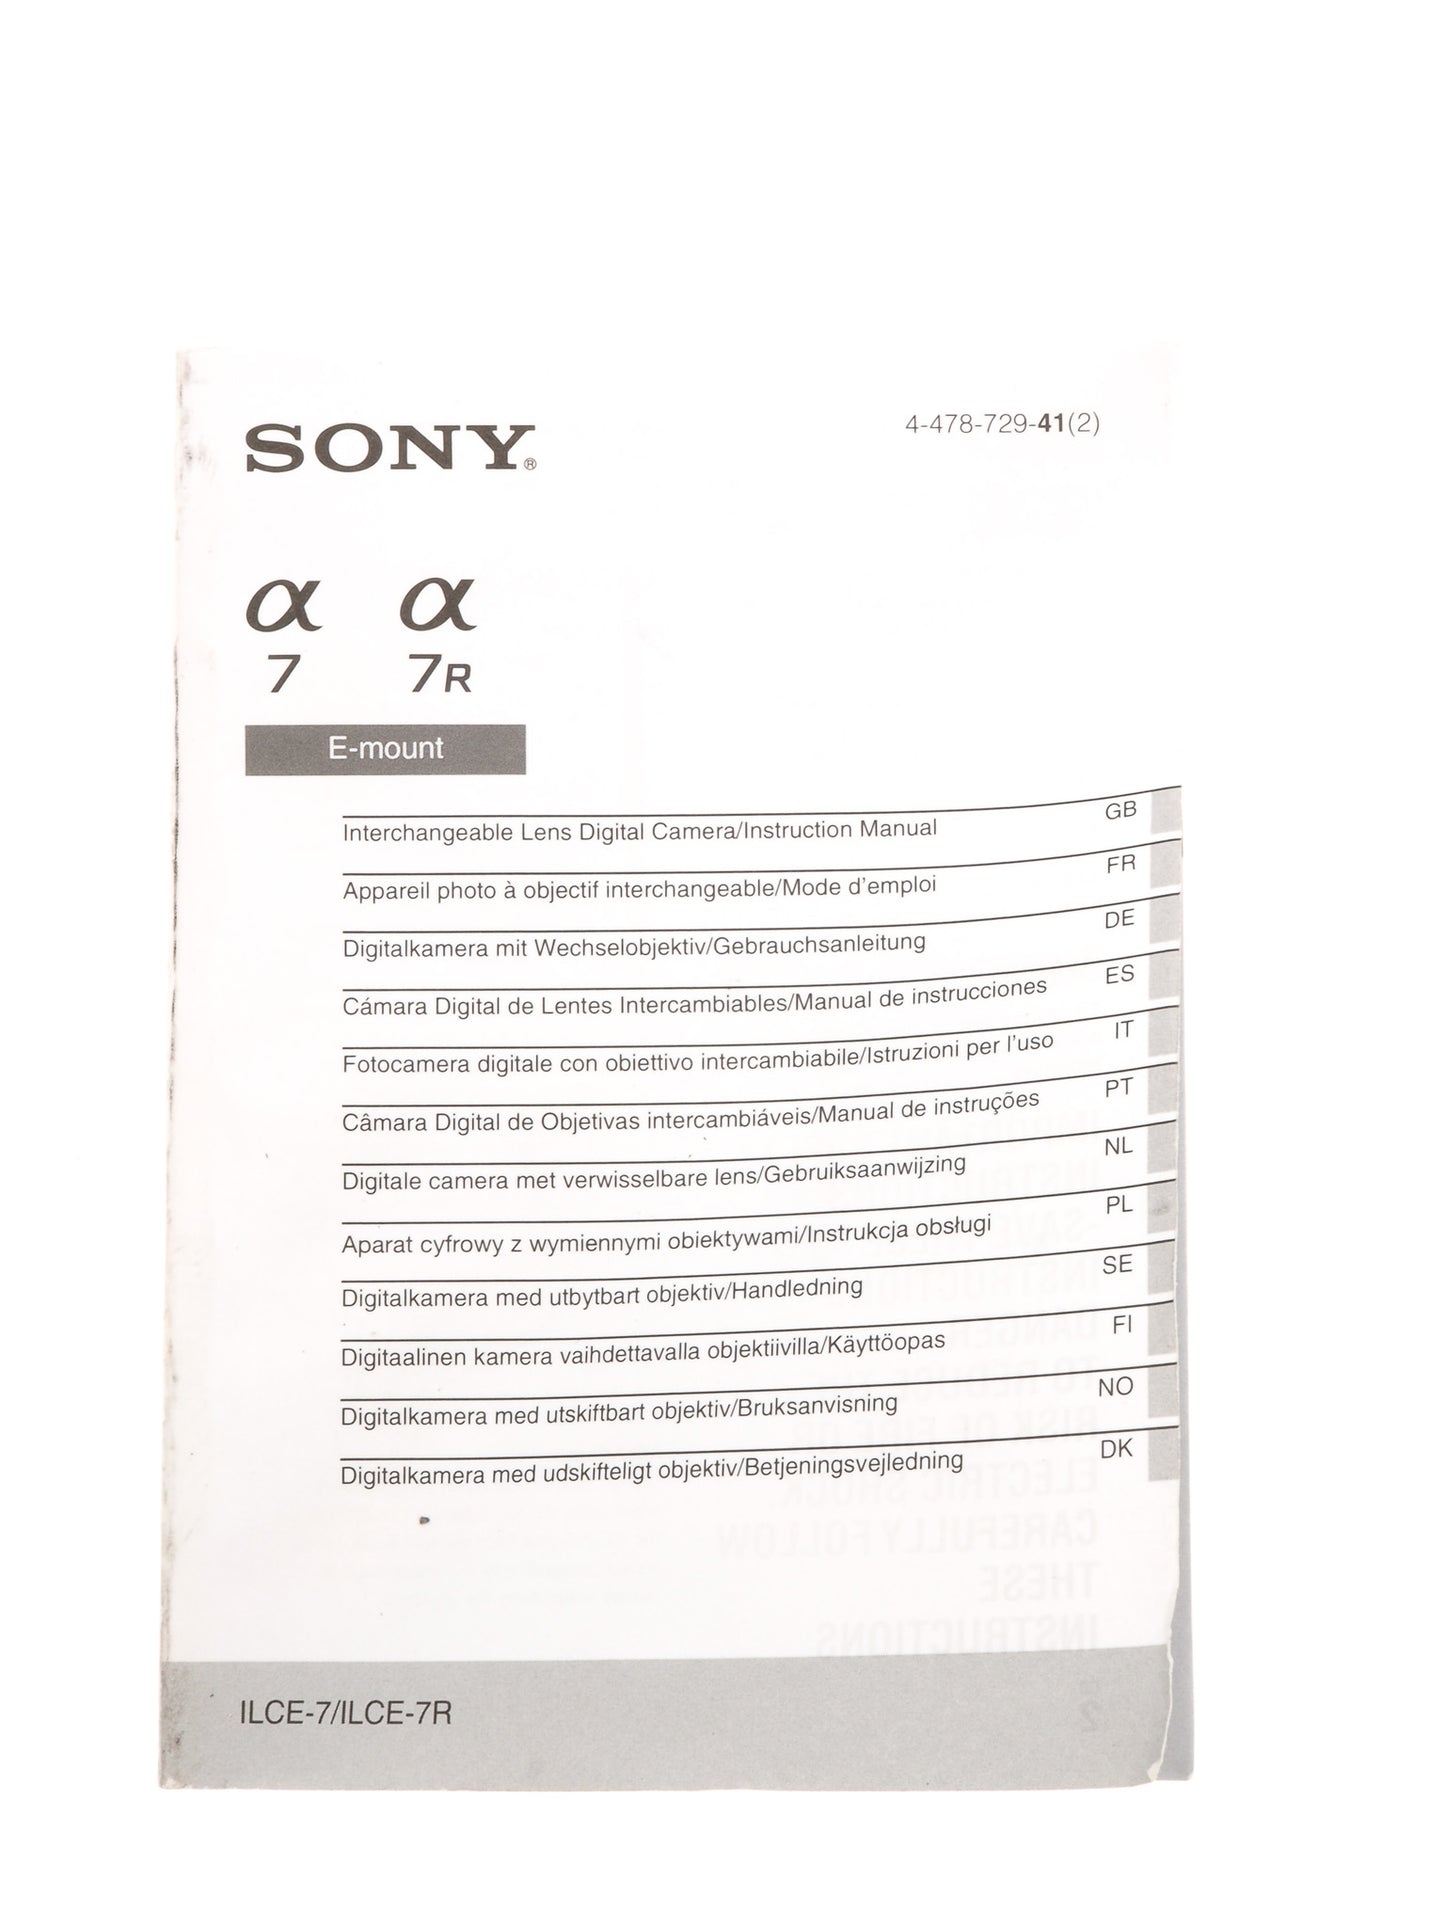 Sony A7 / A7R Instructions - Accessory